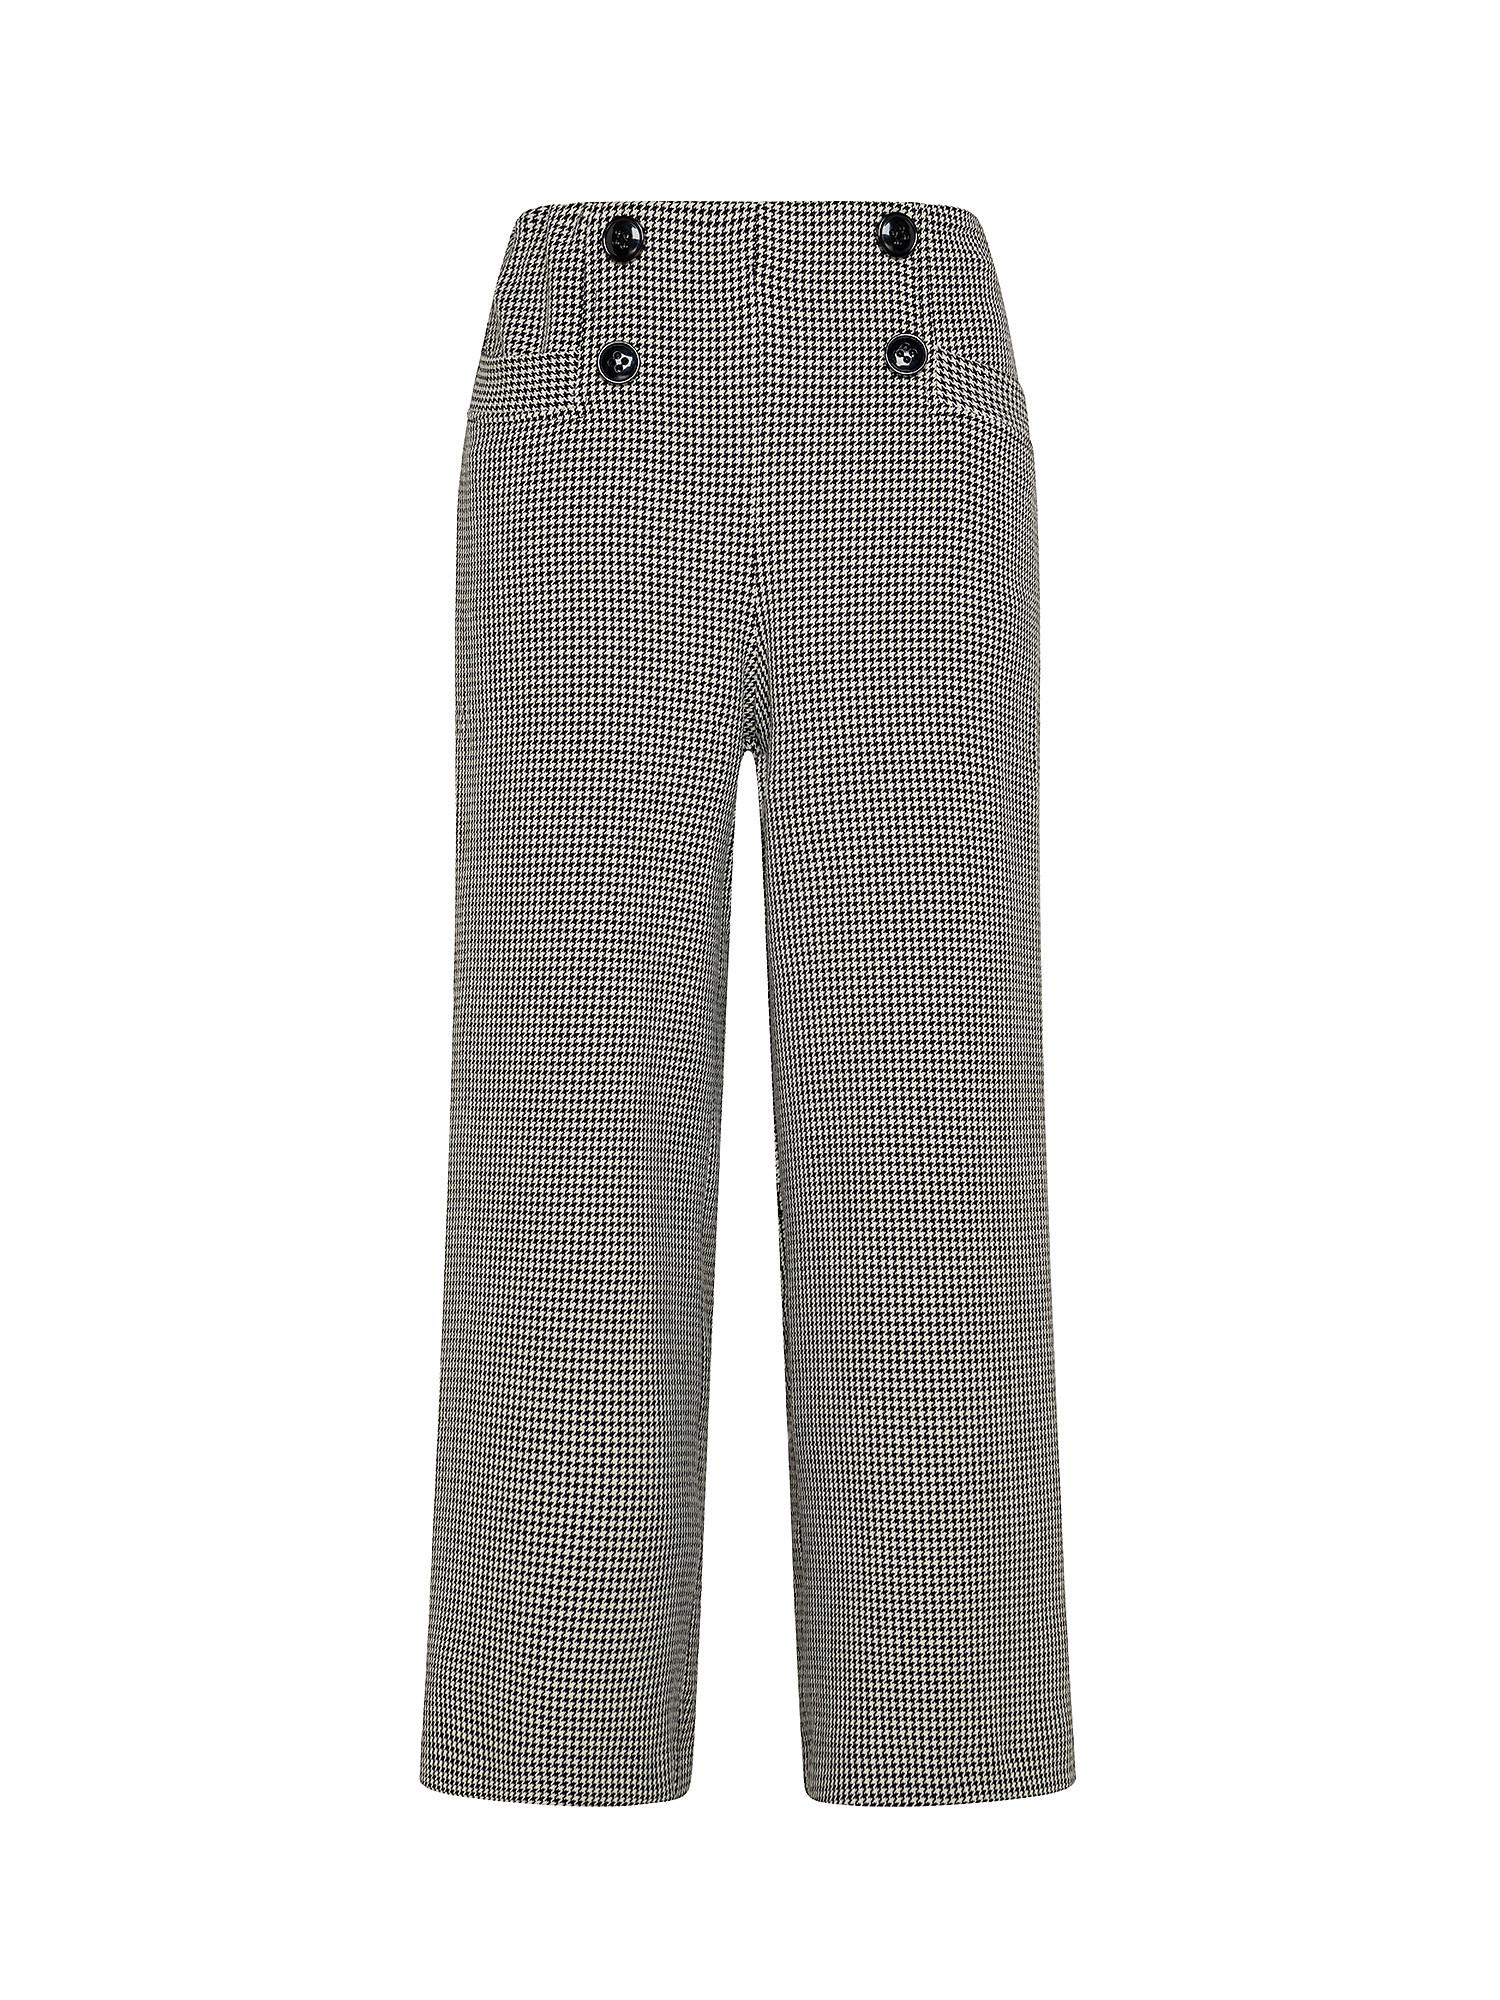 Houndstooth trousers, White, large image number 0